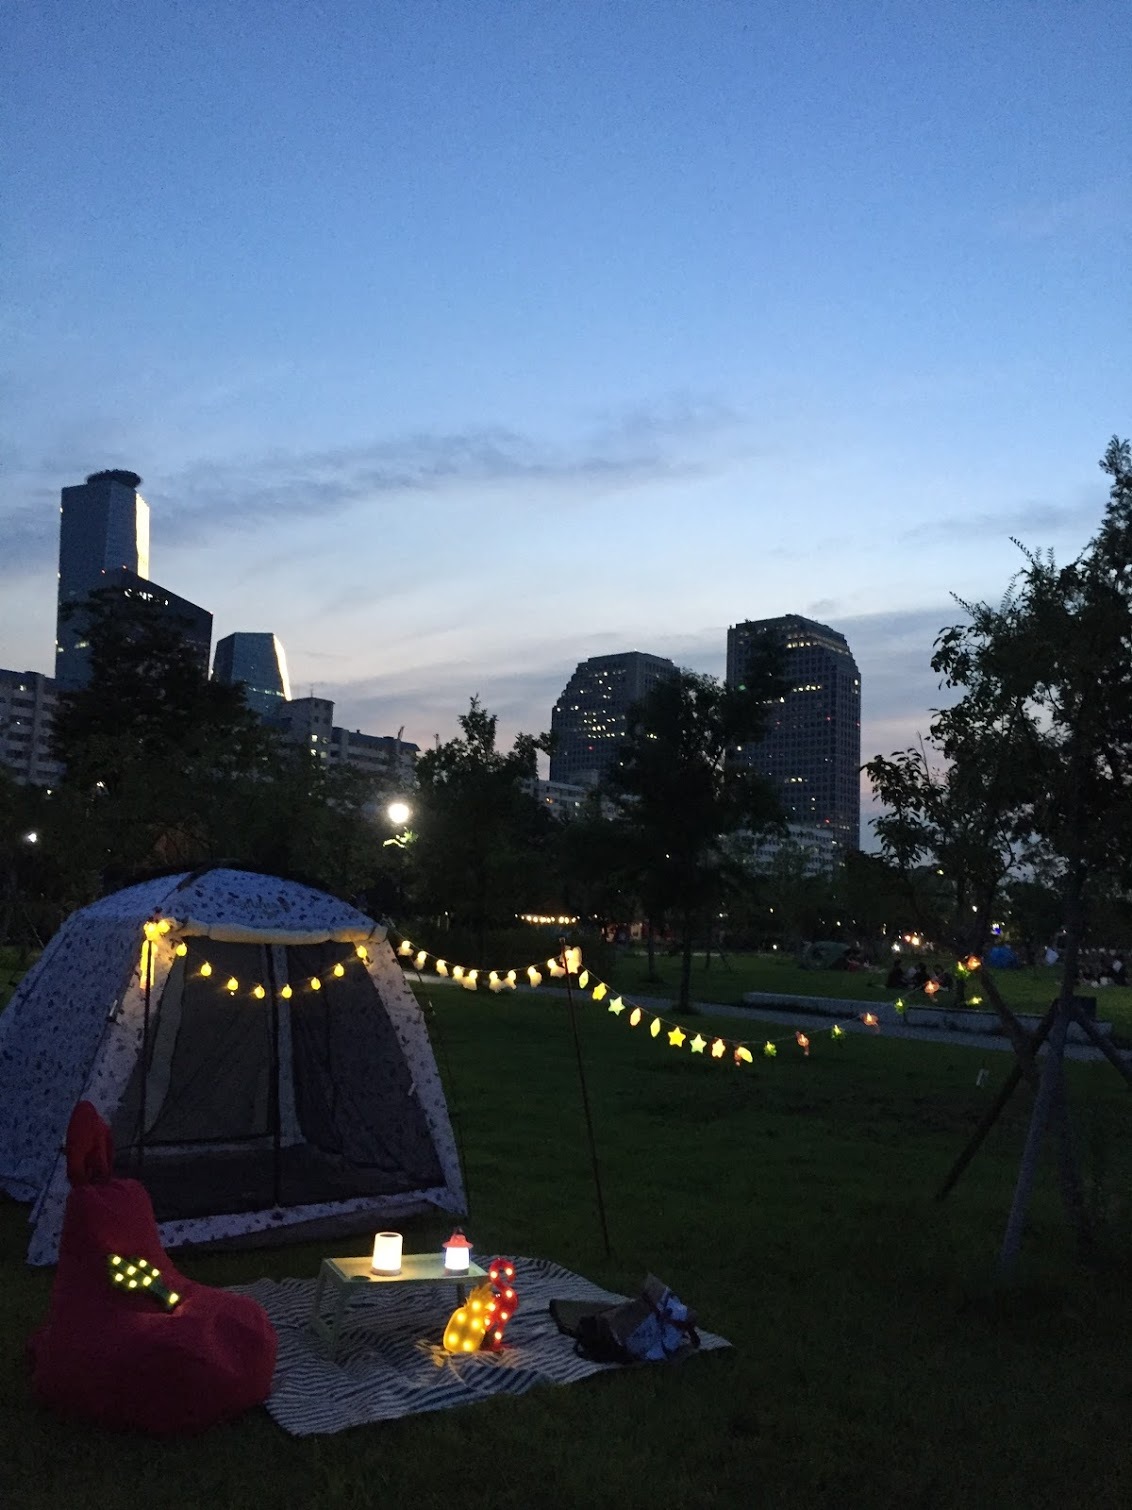 Camping rentals, such as Sudden Picnic, flourish around riverside parks in Seoul (Sudden Picnic)